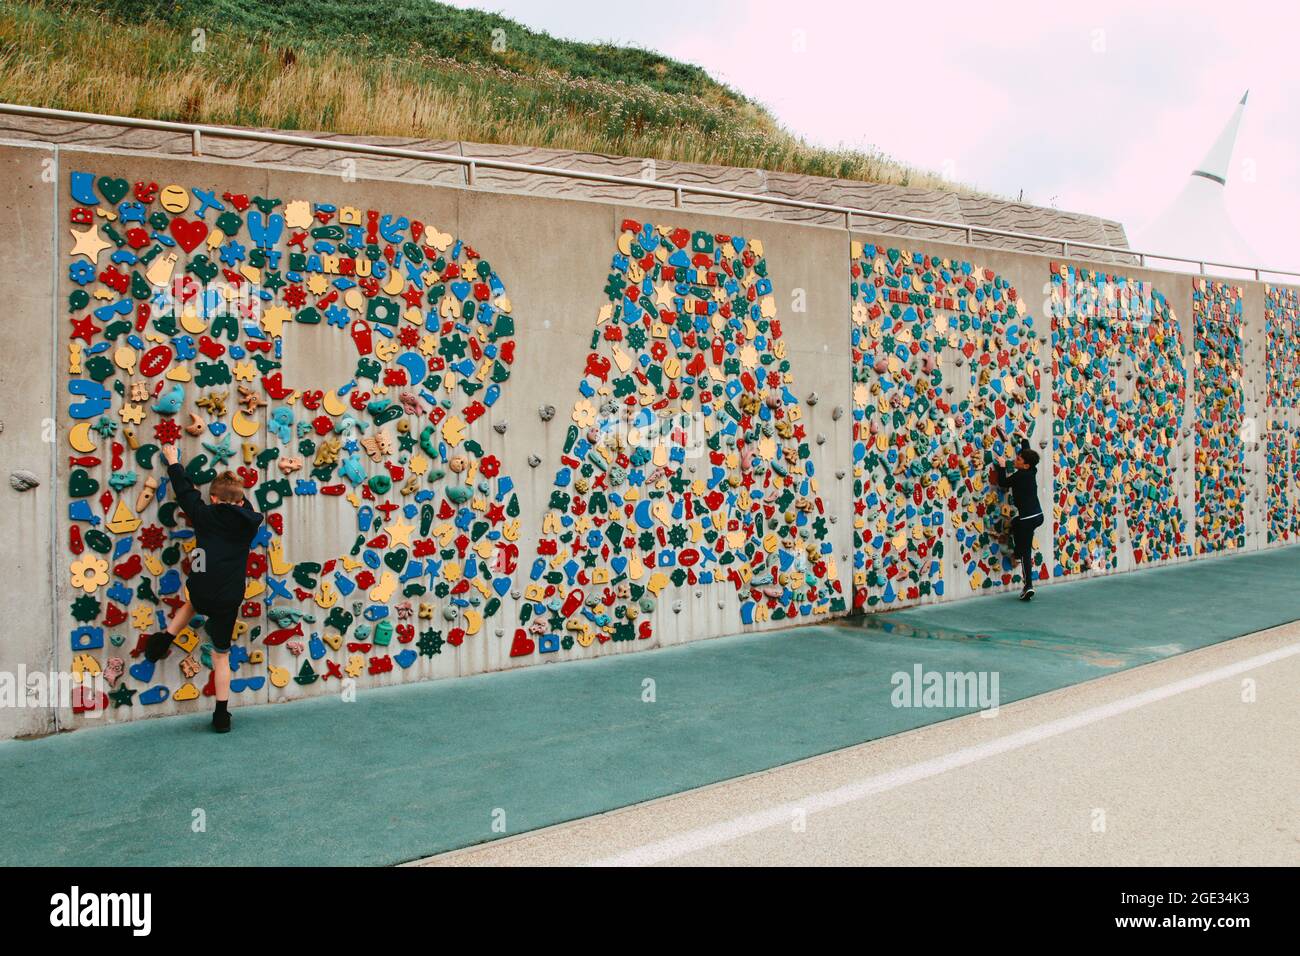 Farbenfrohe Kletterwand an der Promenade, Whitmore Bay, Barry Island, South Wales, 2021 Stockfoto